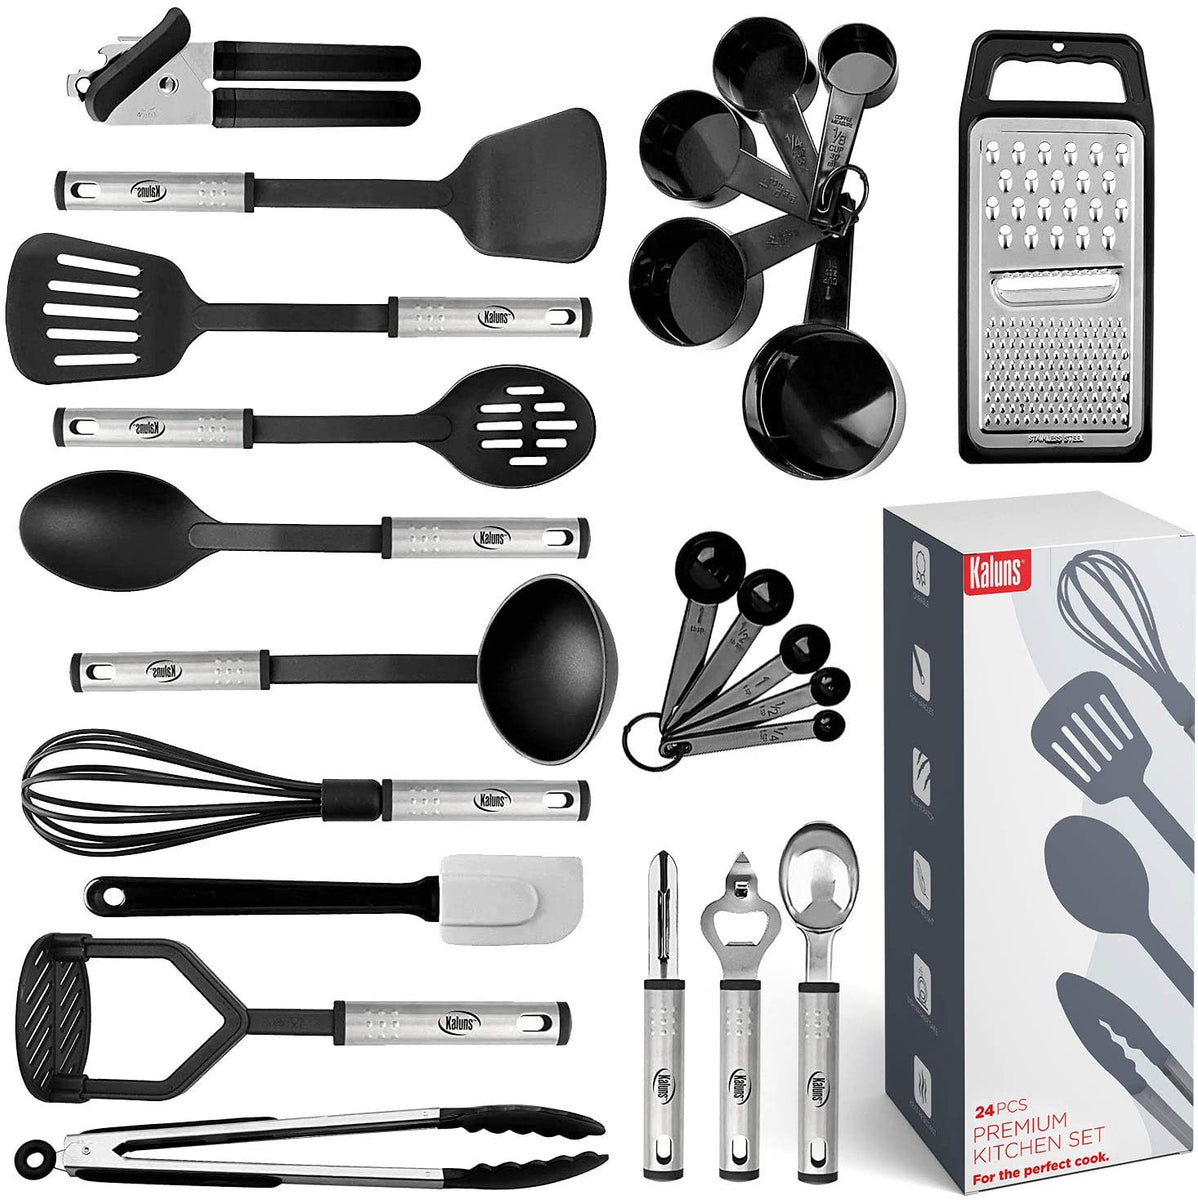 Kaluns Kitchen Utensils Set, 21 Piece Wood and Silicone, Cooking Utensils,  Dishwasher Safe and Heat Resistant Kitchen Tools, Black